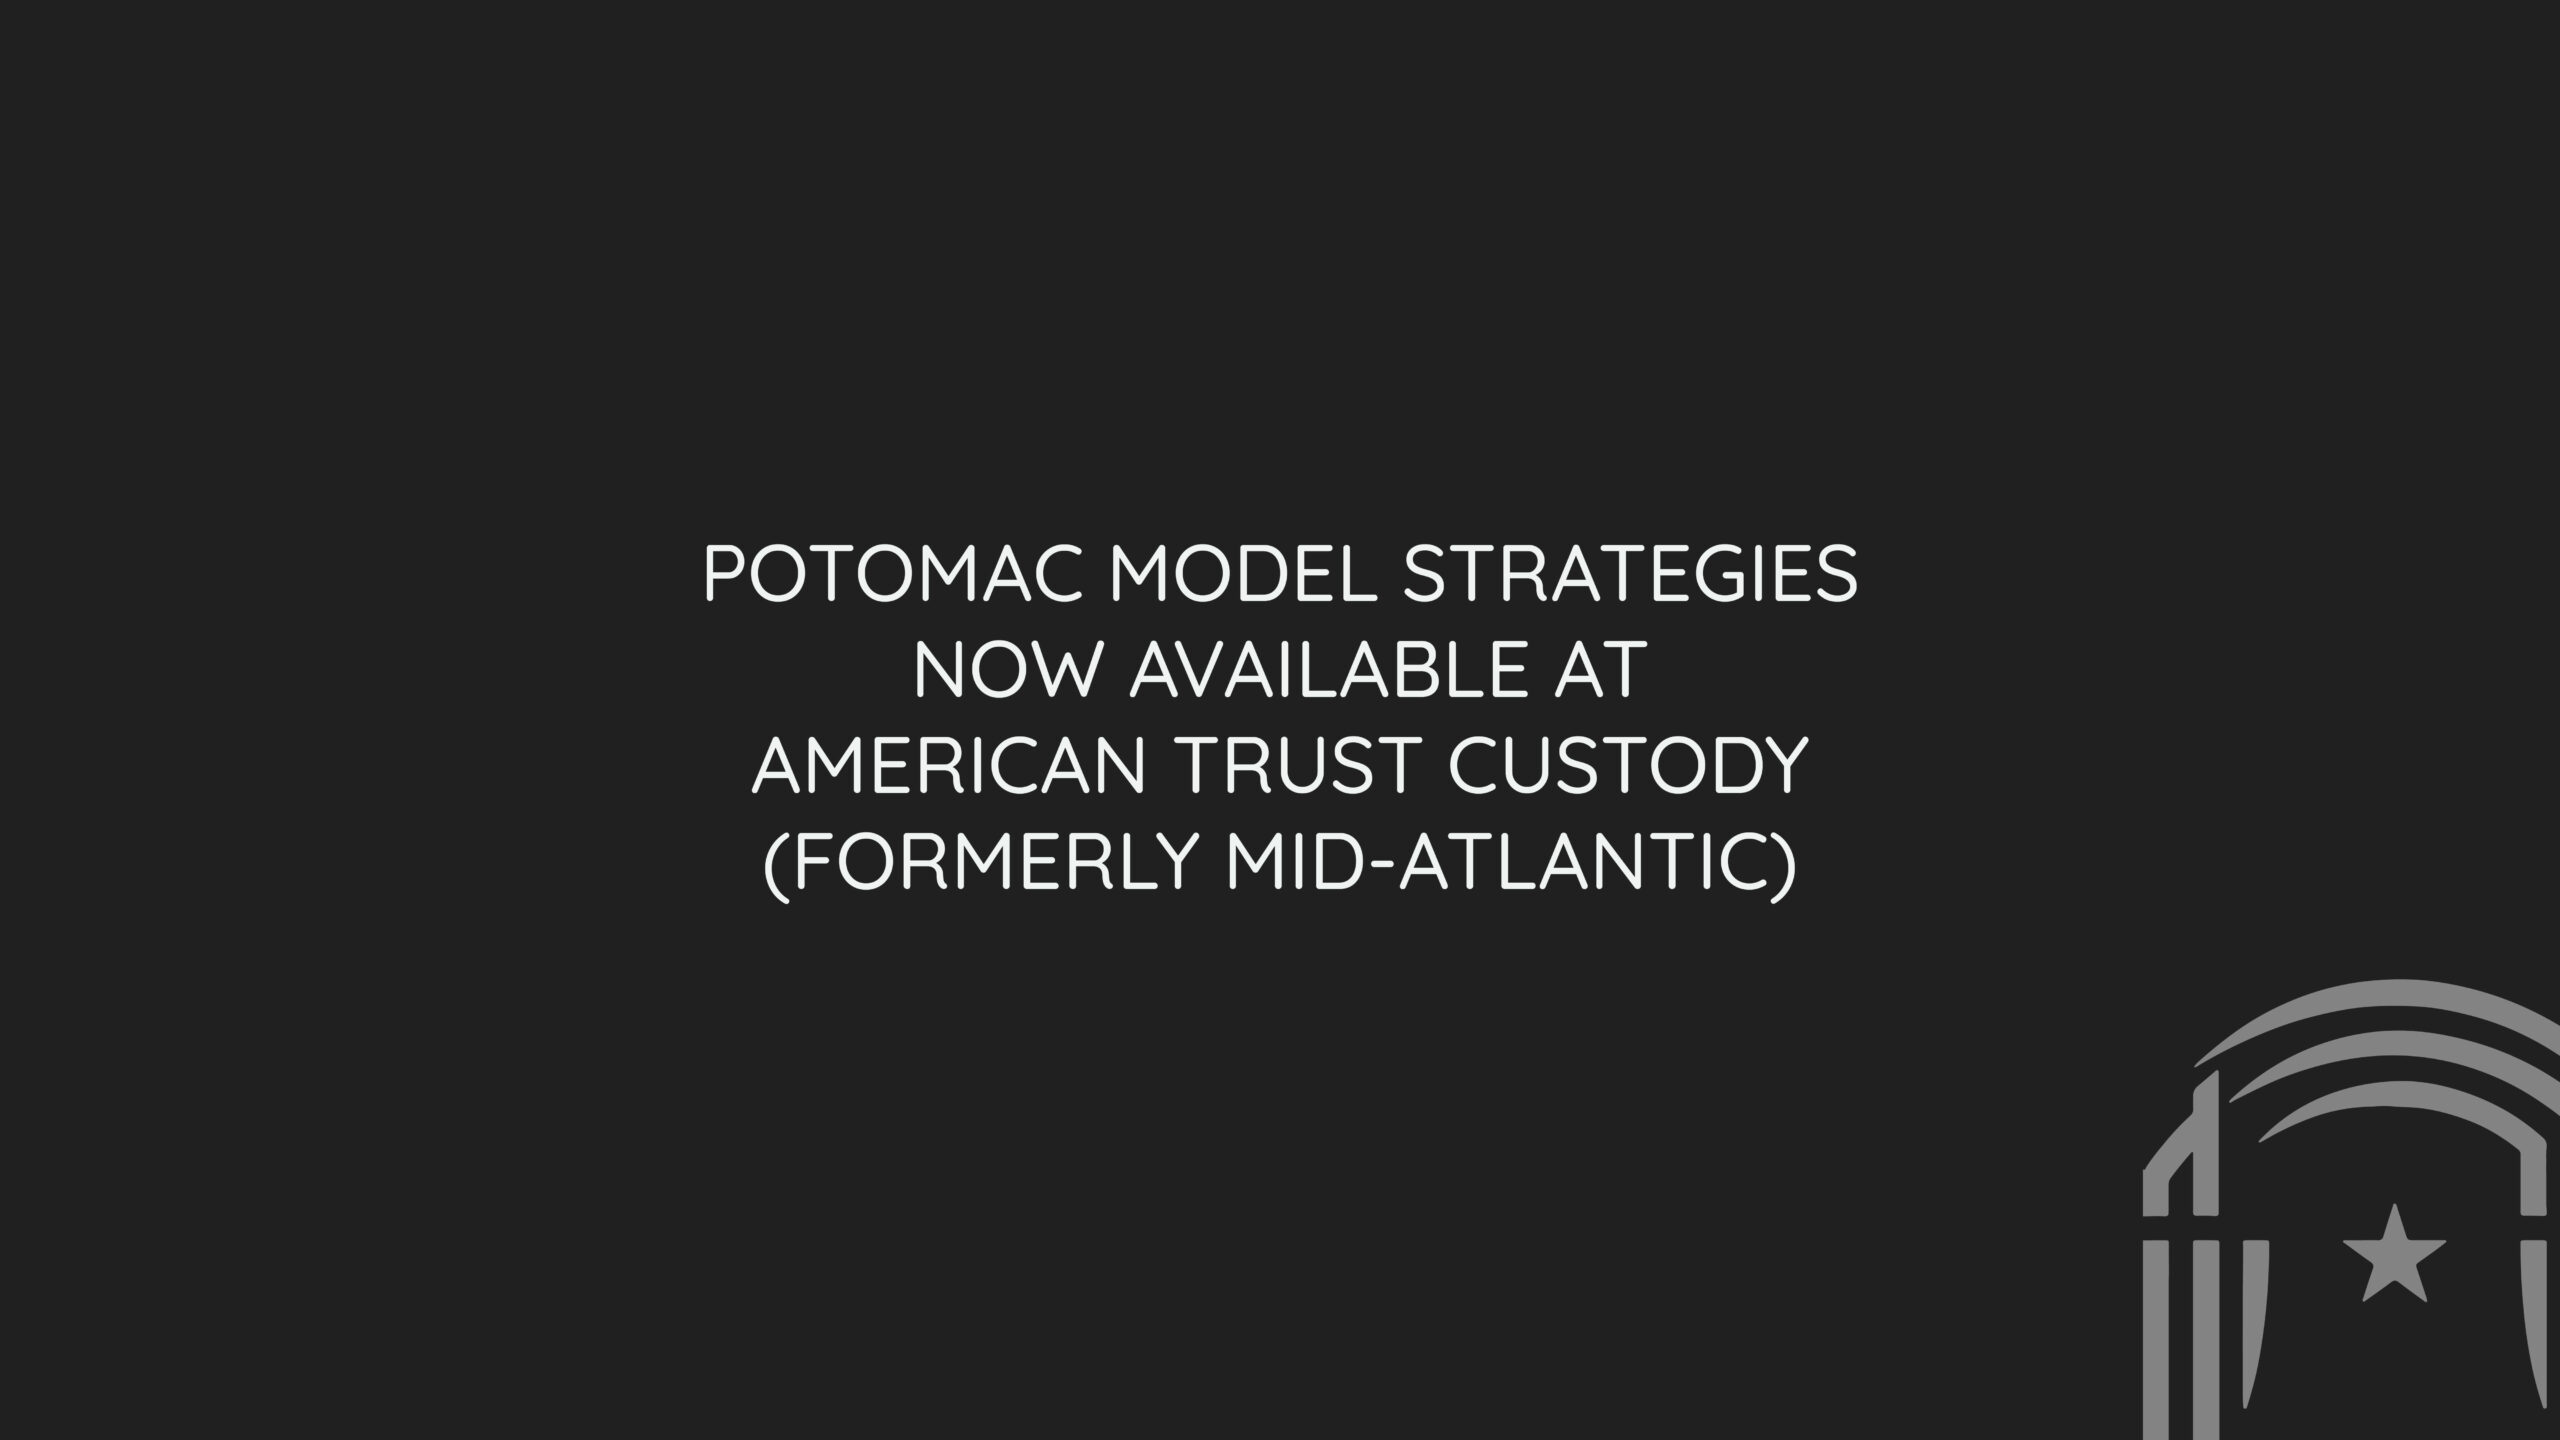 Potomac Fund Management Now Available at American Trust Custody